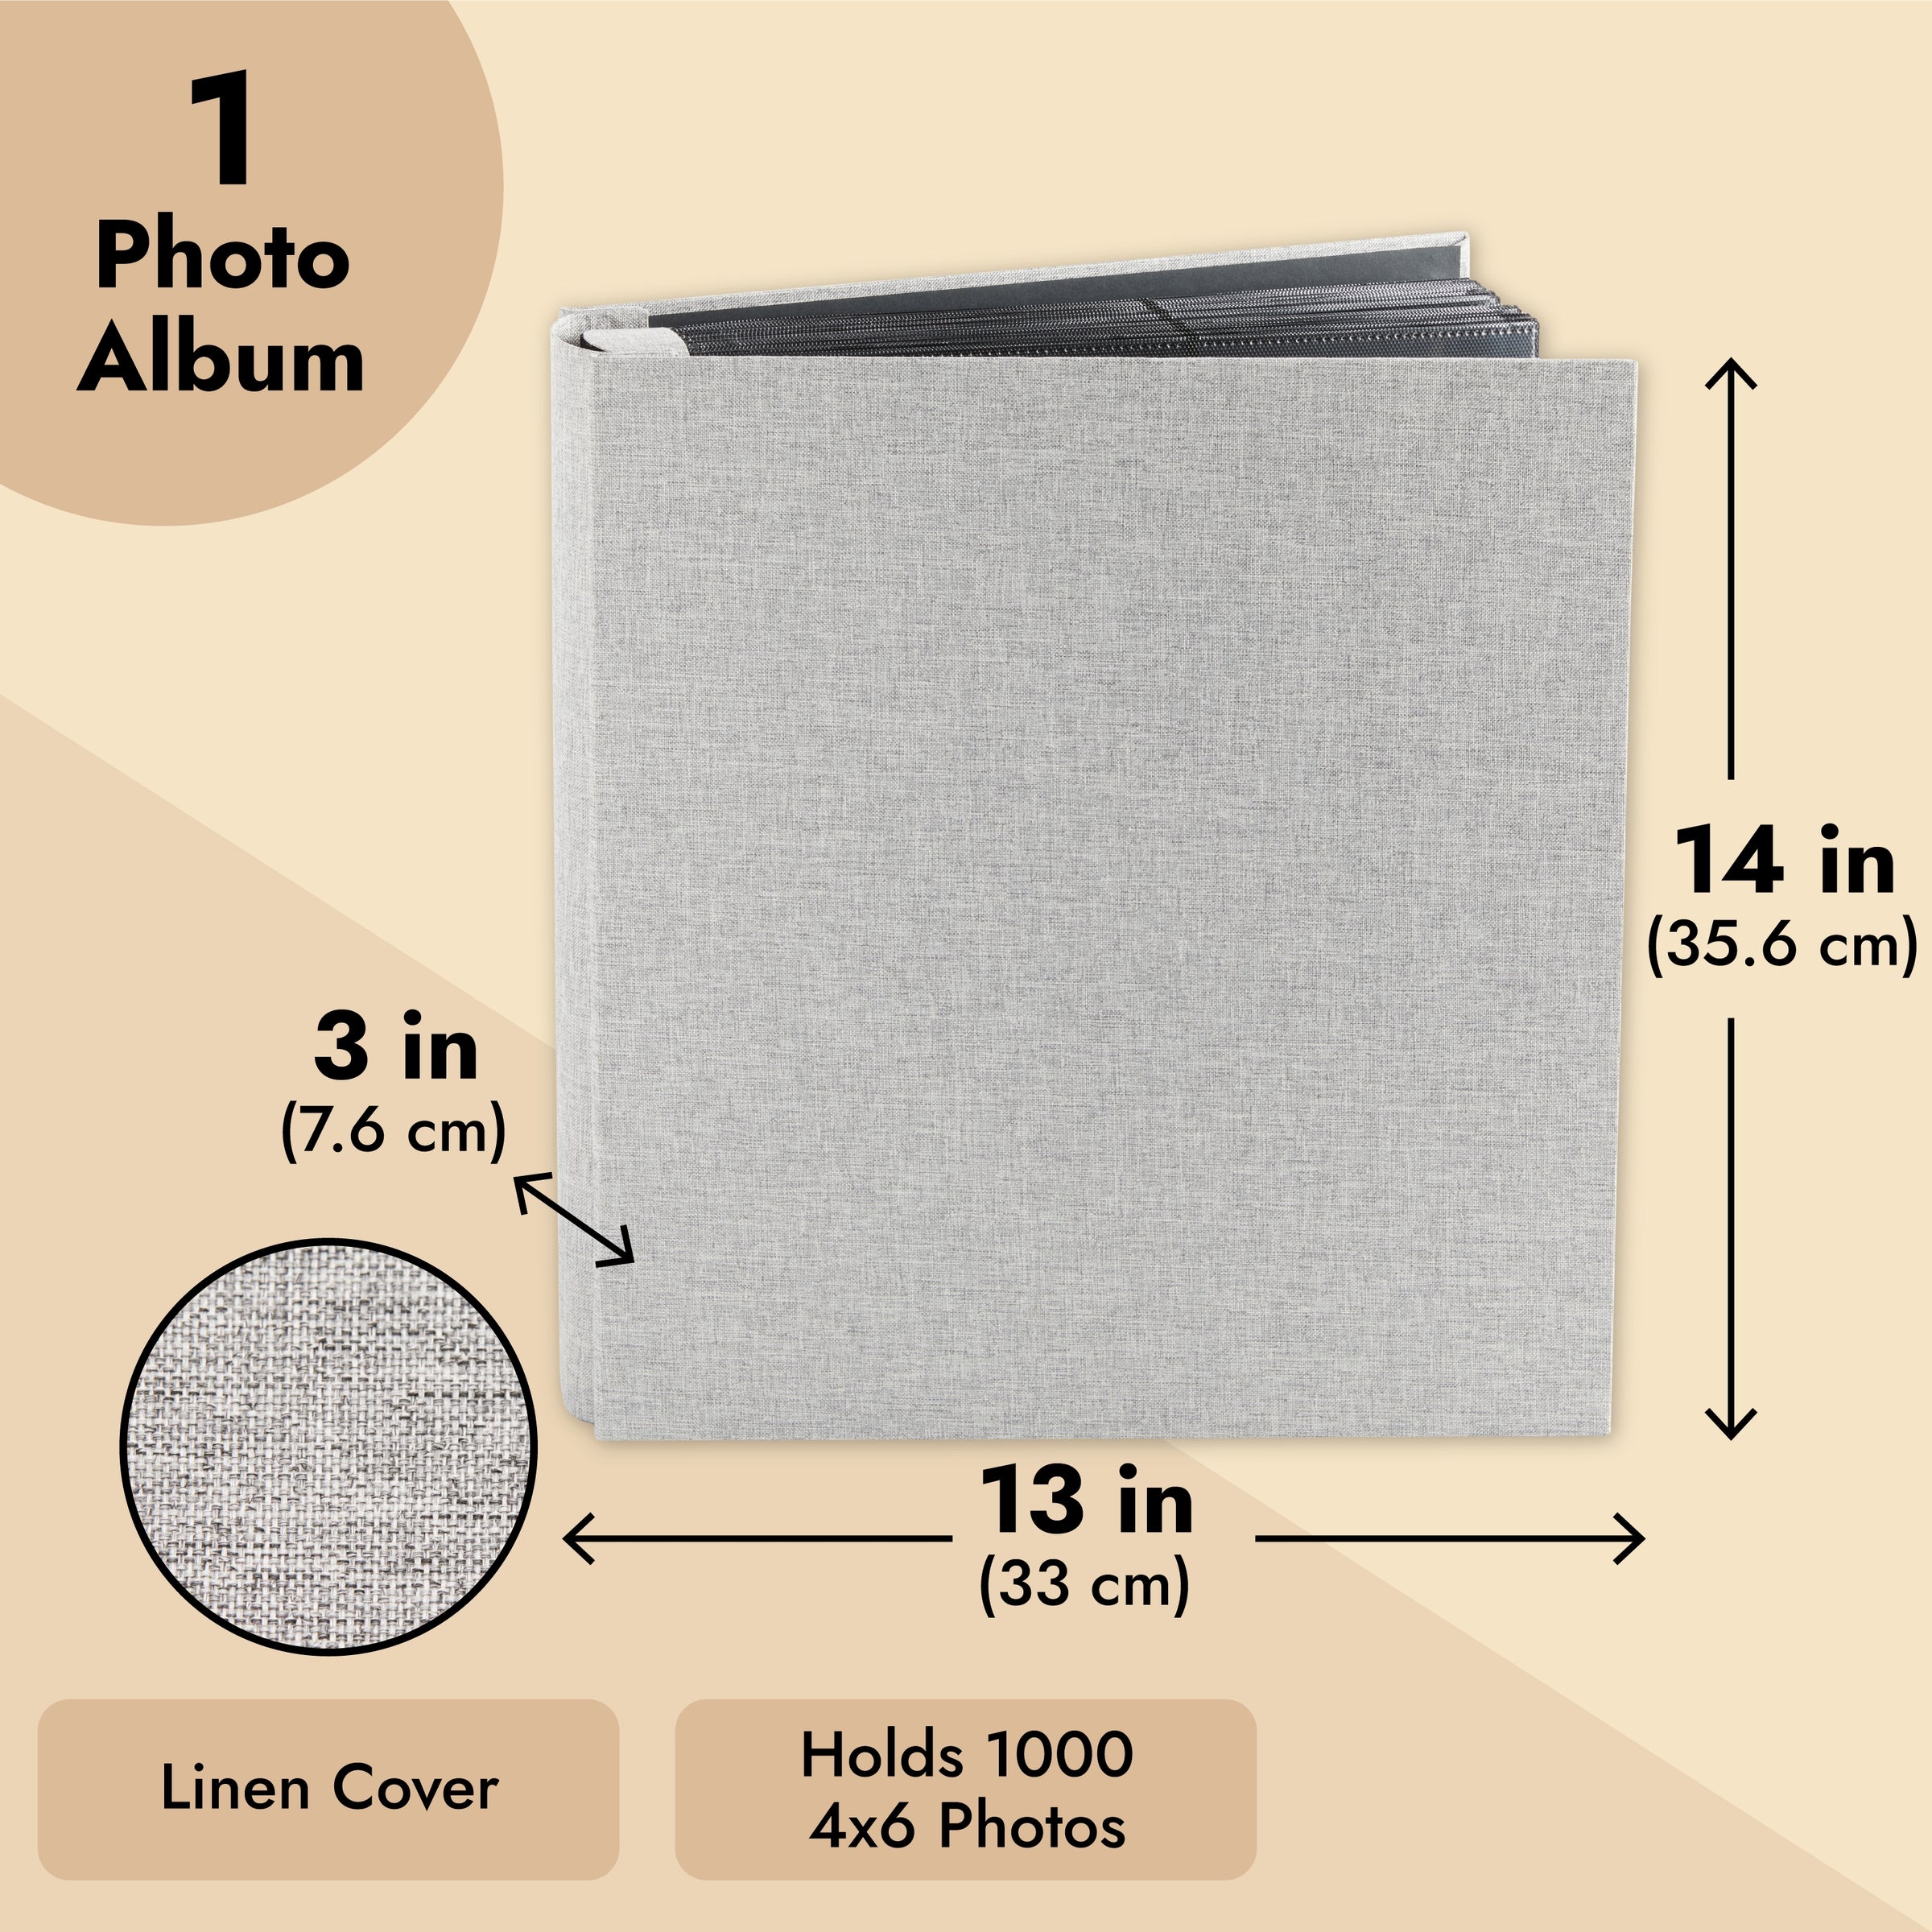 4x6 Photo Album with 1000 Pockets, Extra Large Capacity, Linen Cover, –  Pipilo Press